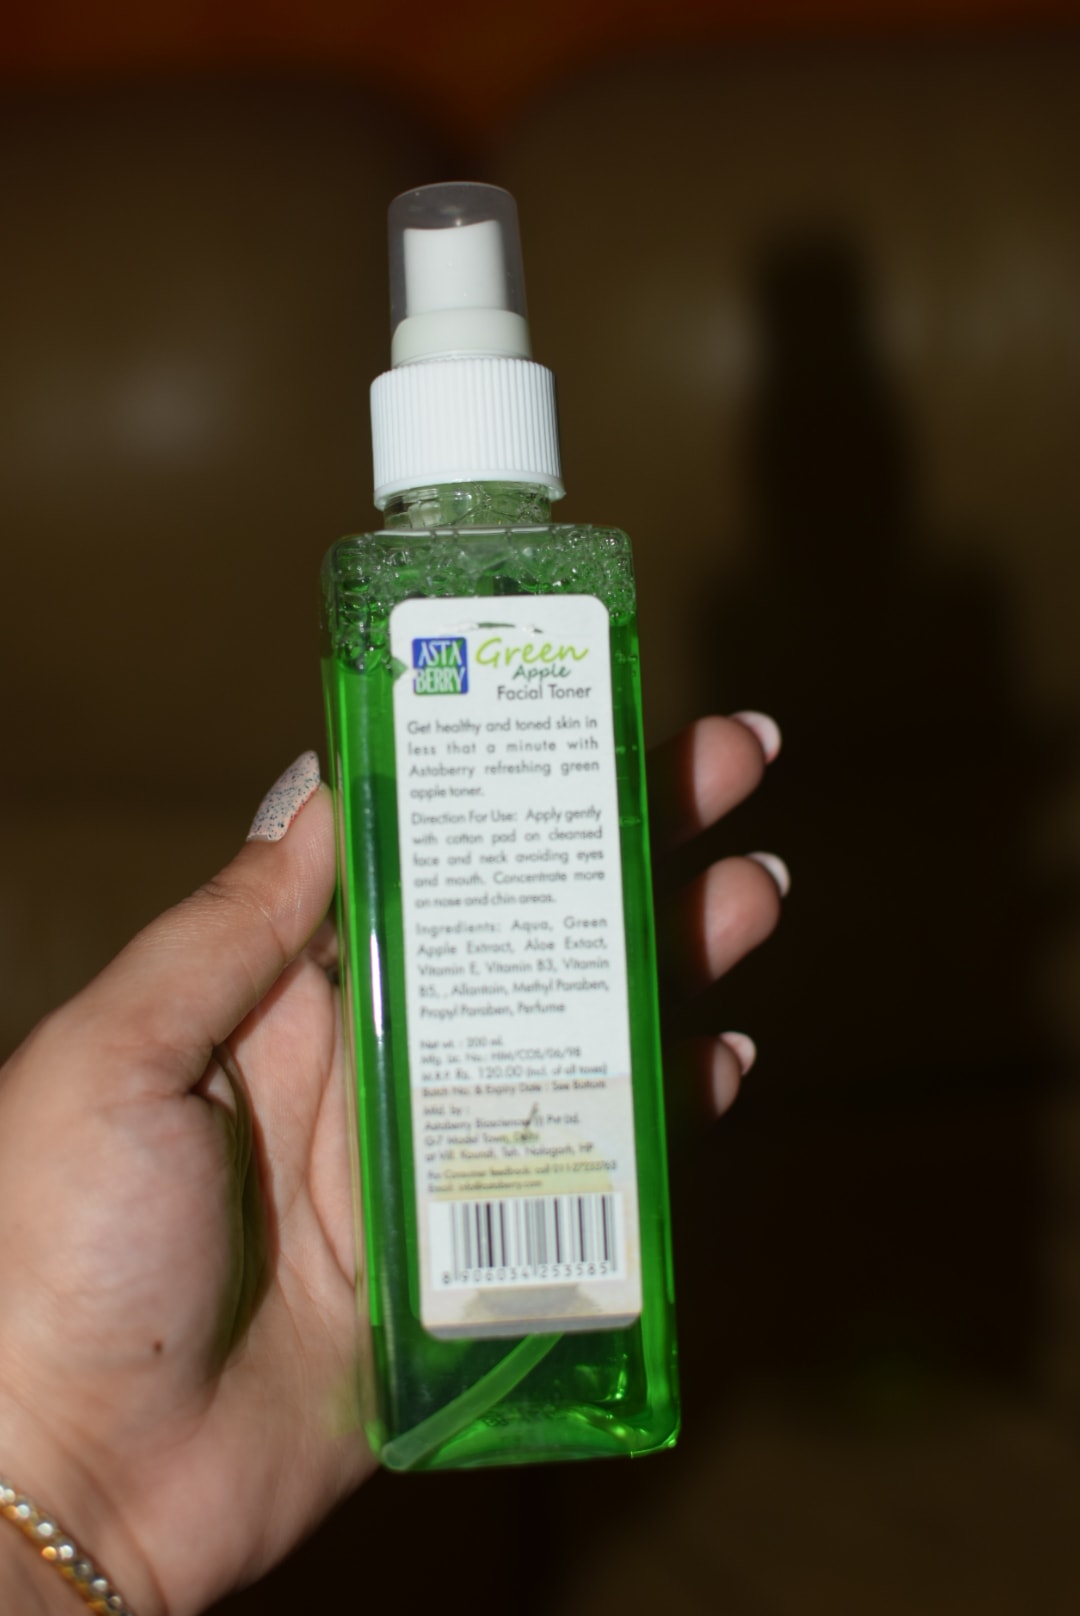 Astaberry Green Apple Toner Review! How to use a toner?